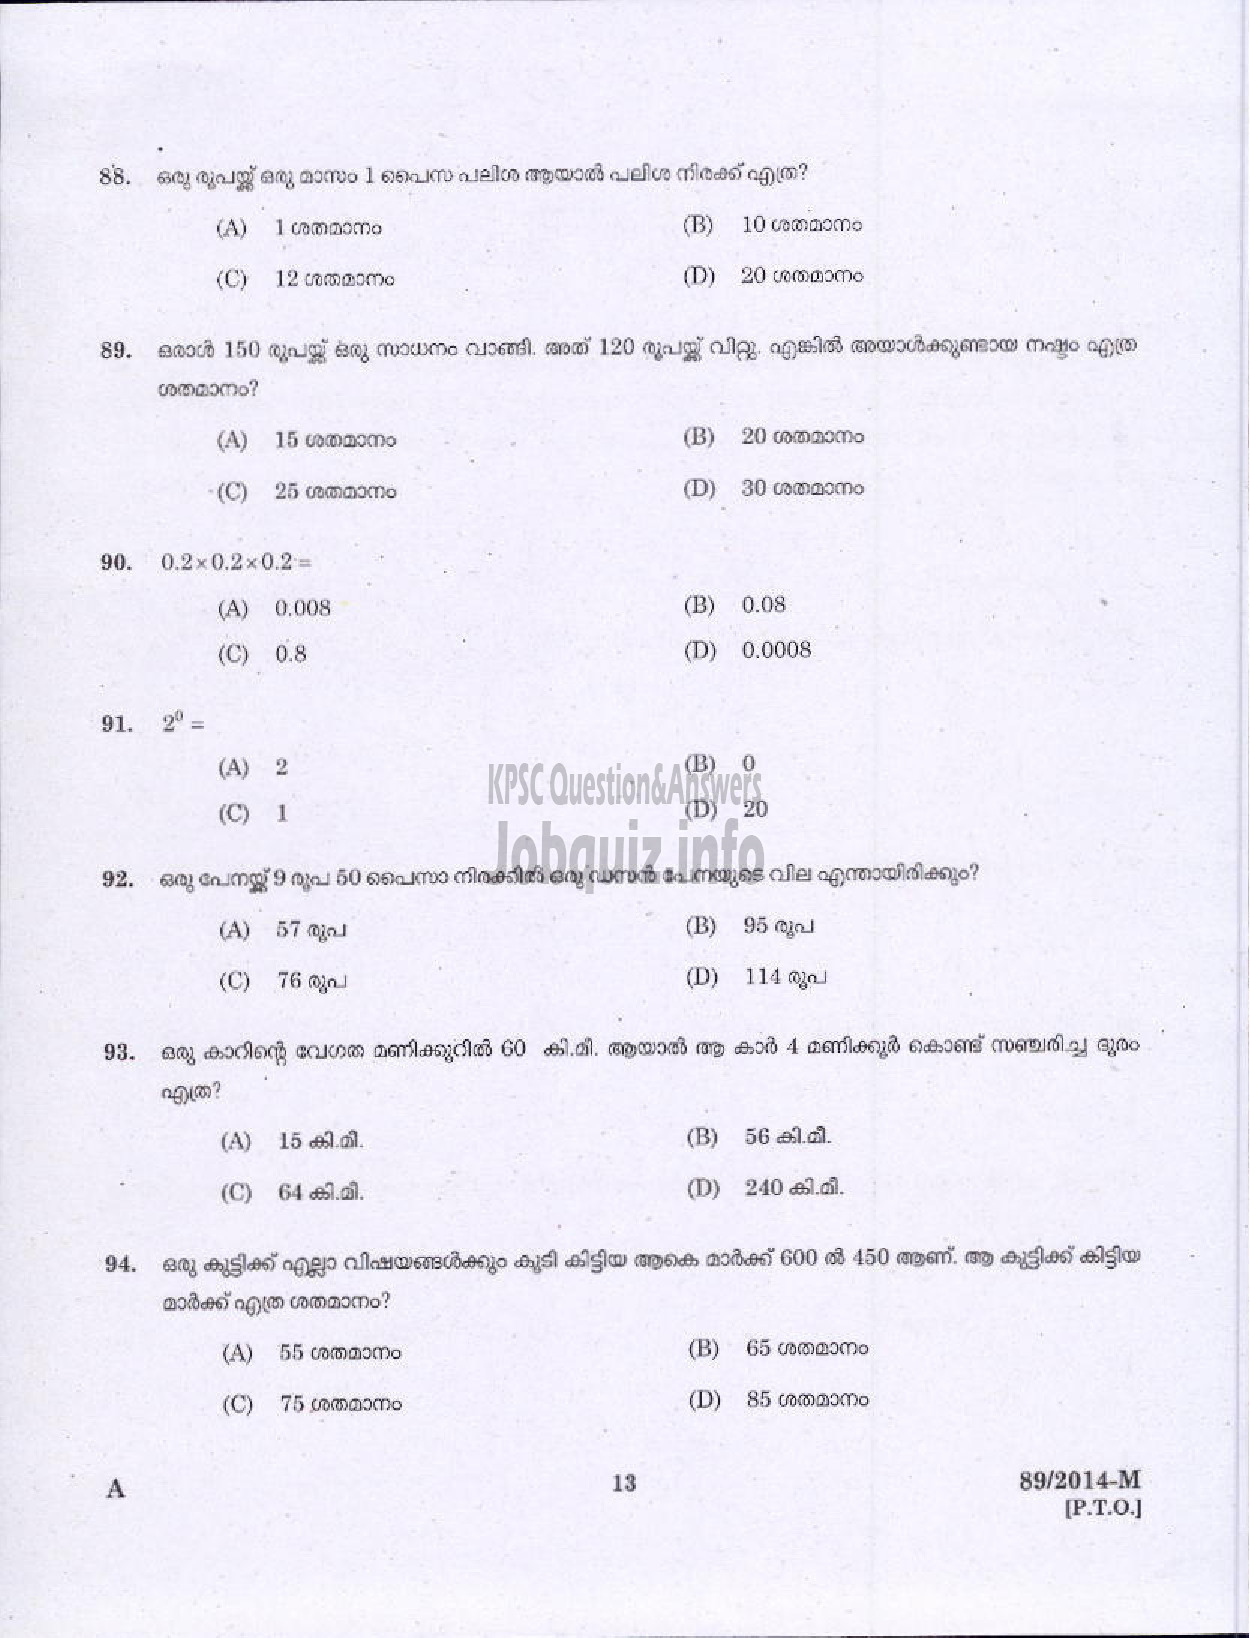 Kerala PSC Question Paper - ATTENDER SR FOR ST ONLY TCC LTD AND LGS NCA OBC VARIOUS KTYM ( Malayalam ) -11